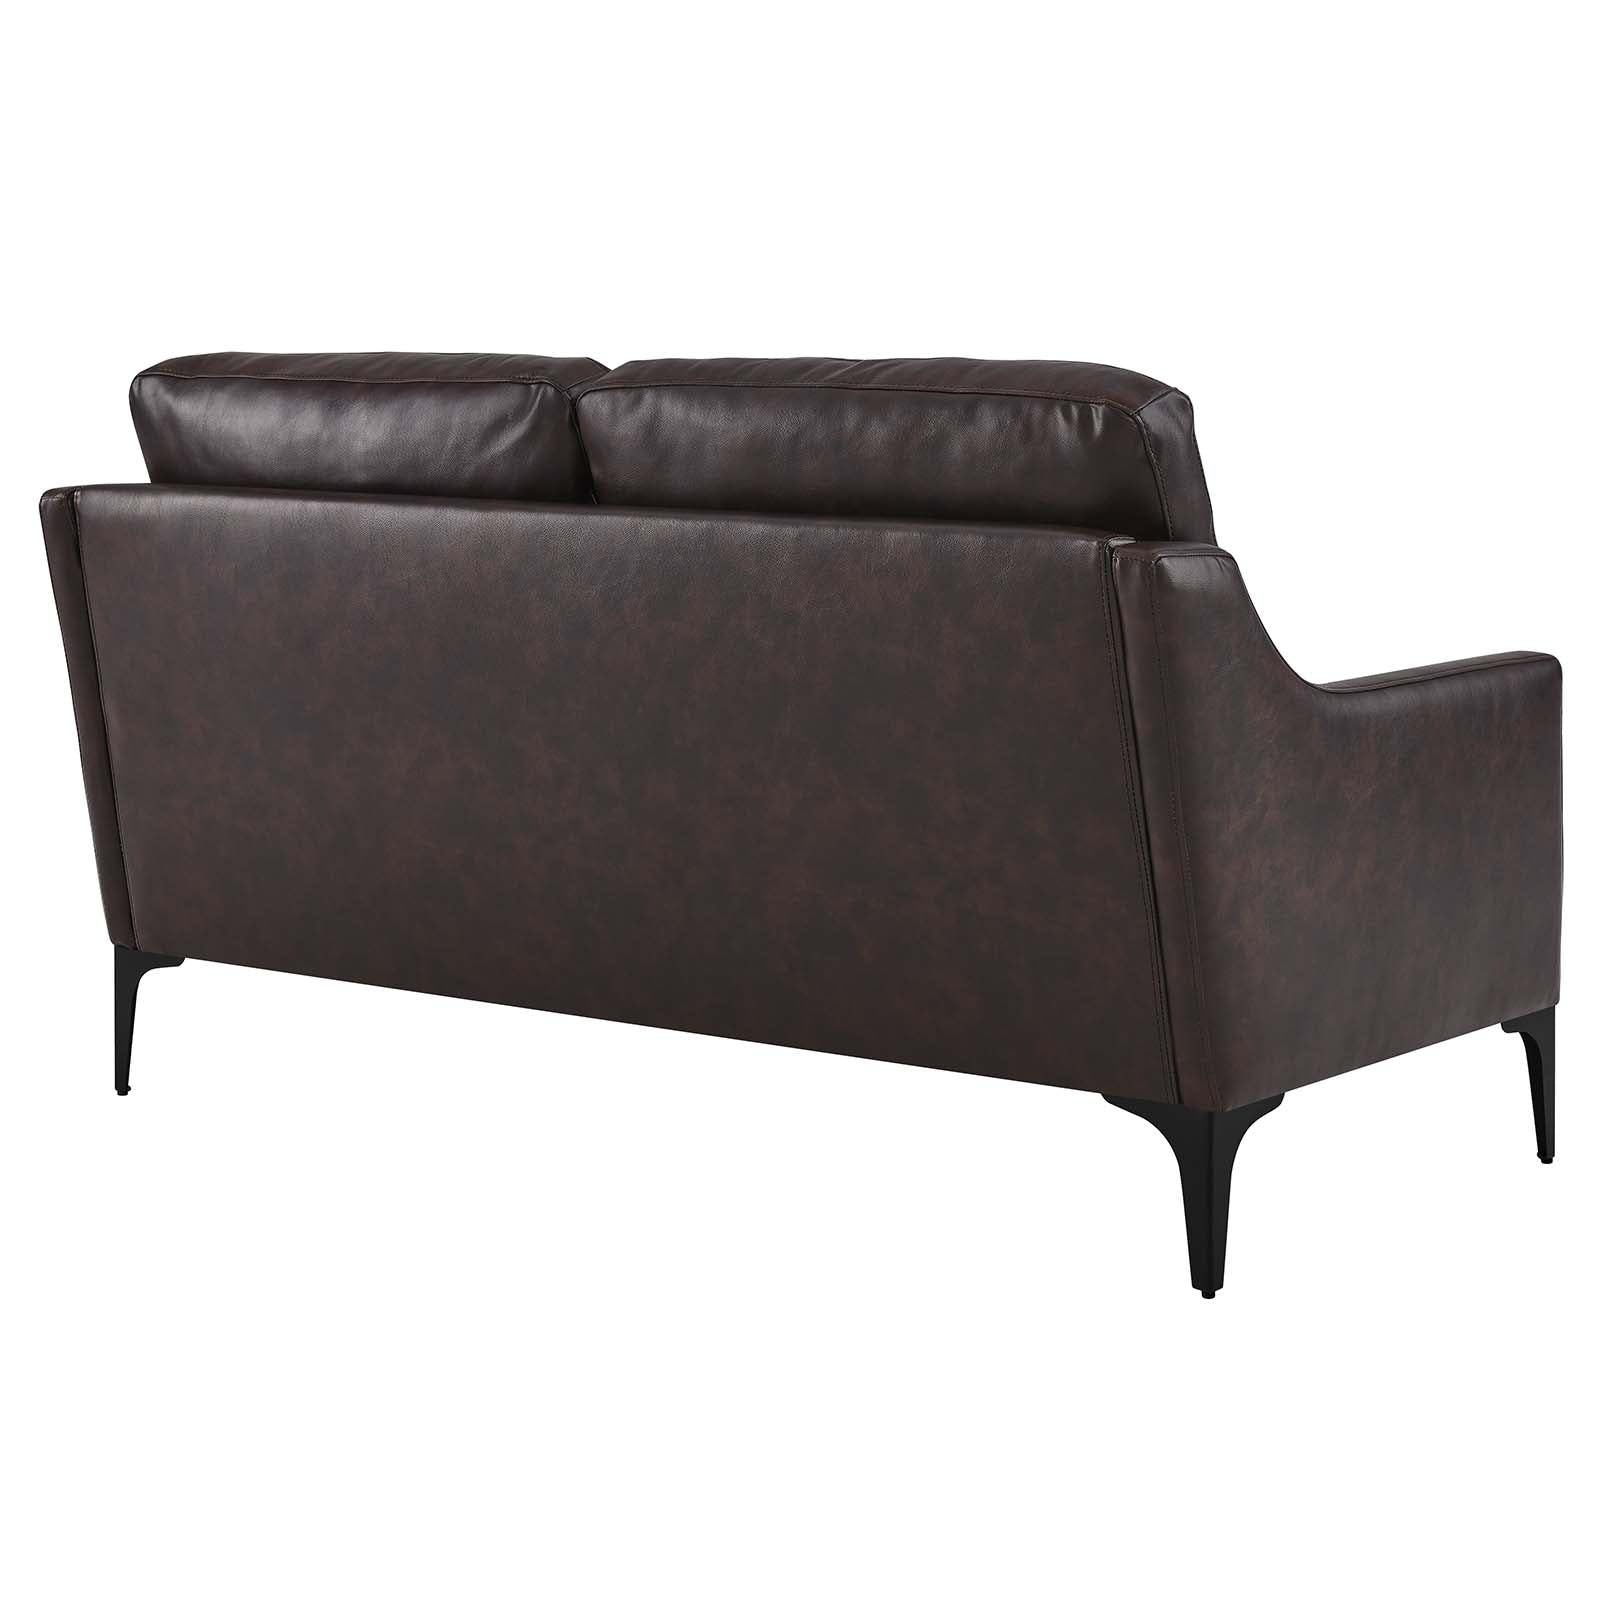 Modway Loveseats - Corland Leather Loveseat Brown